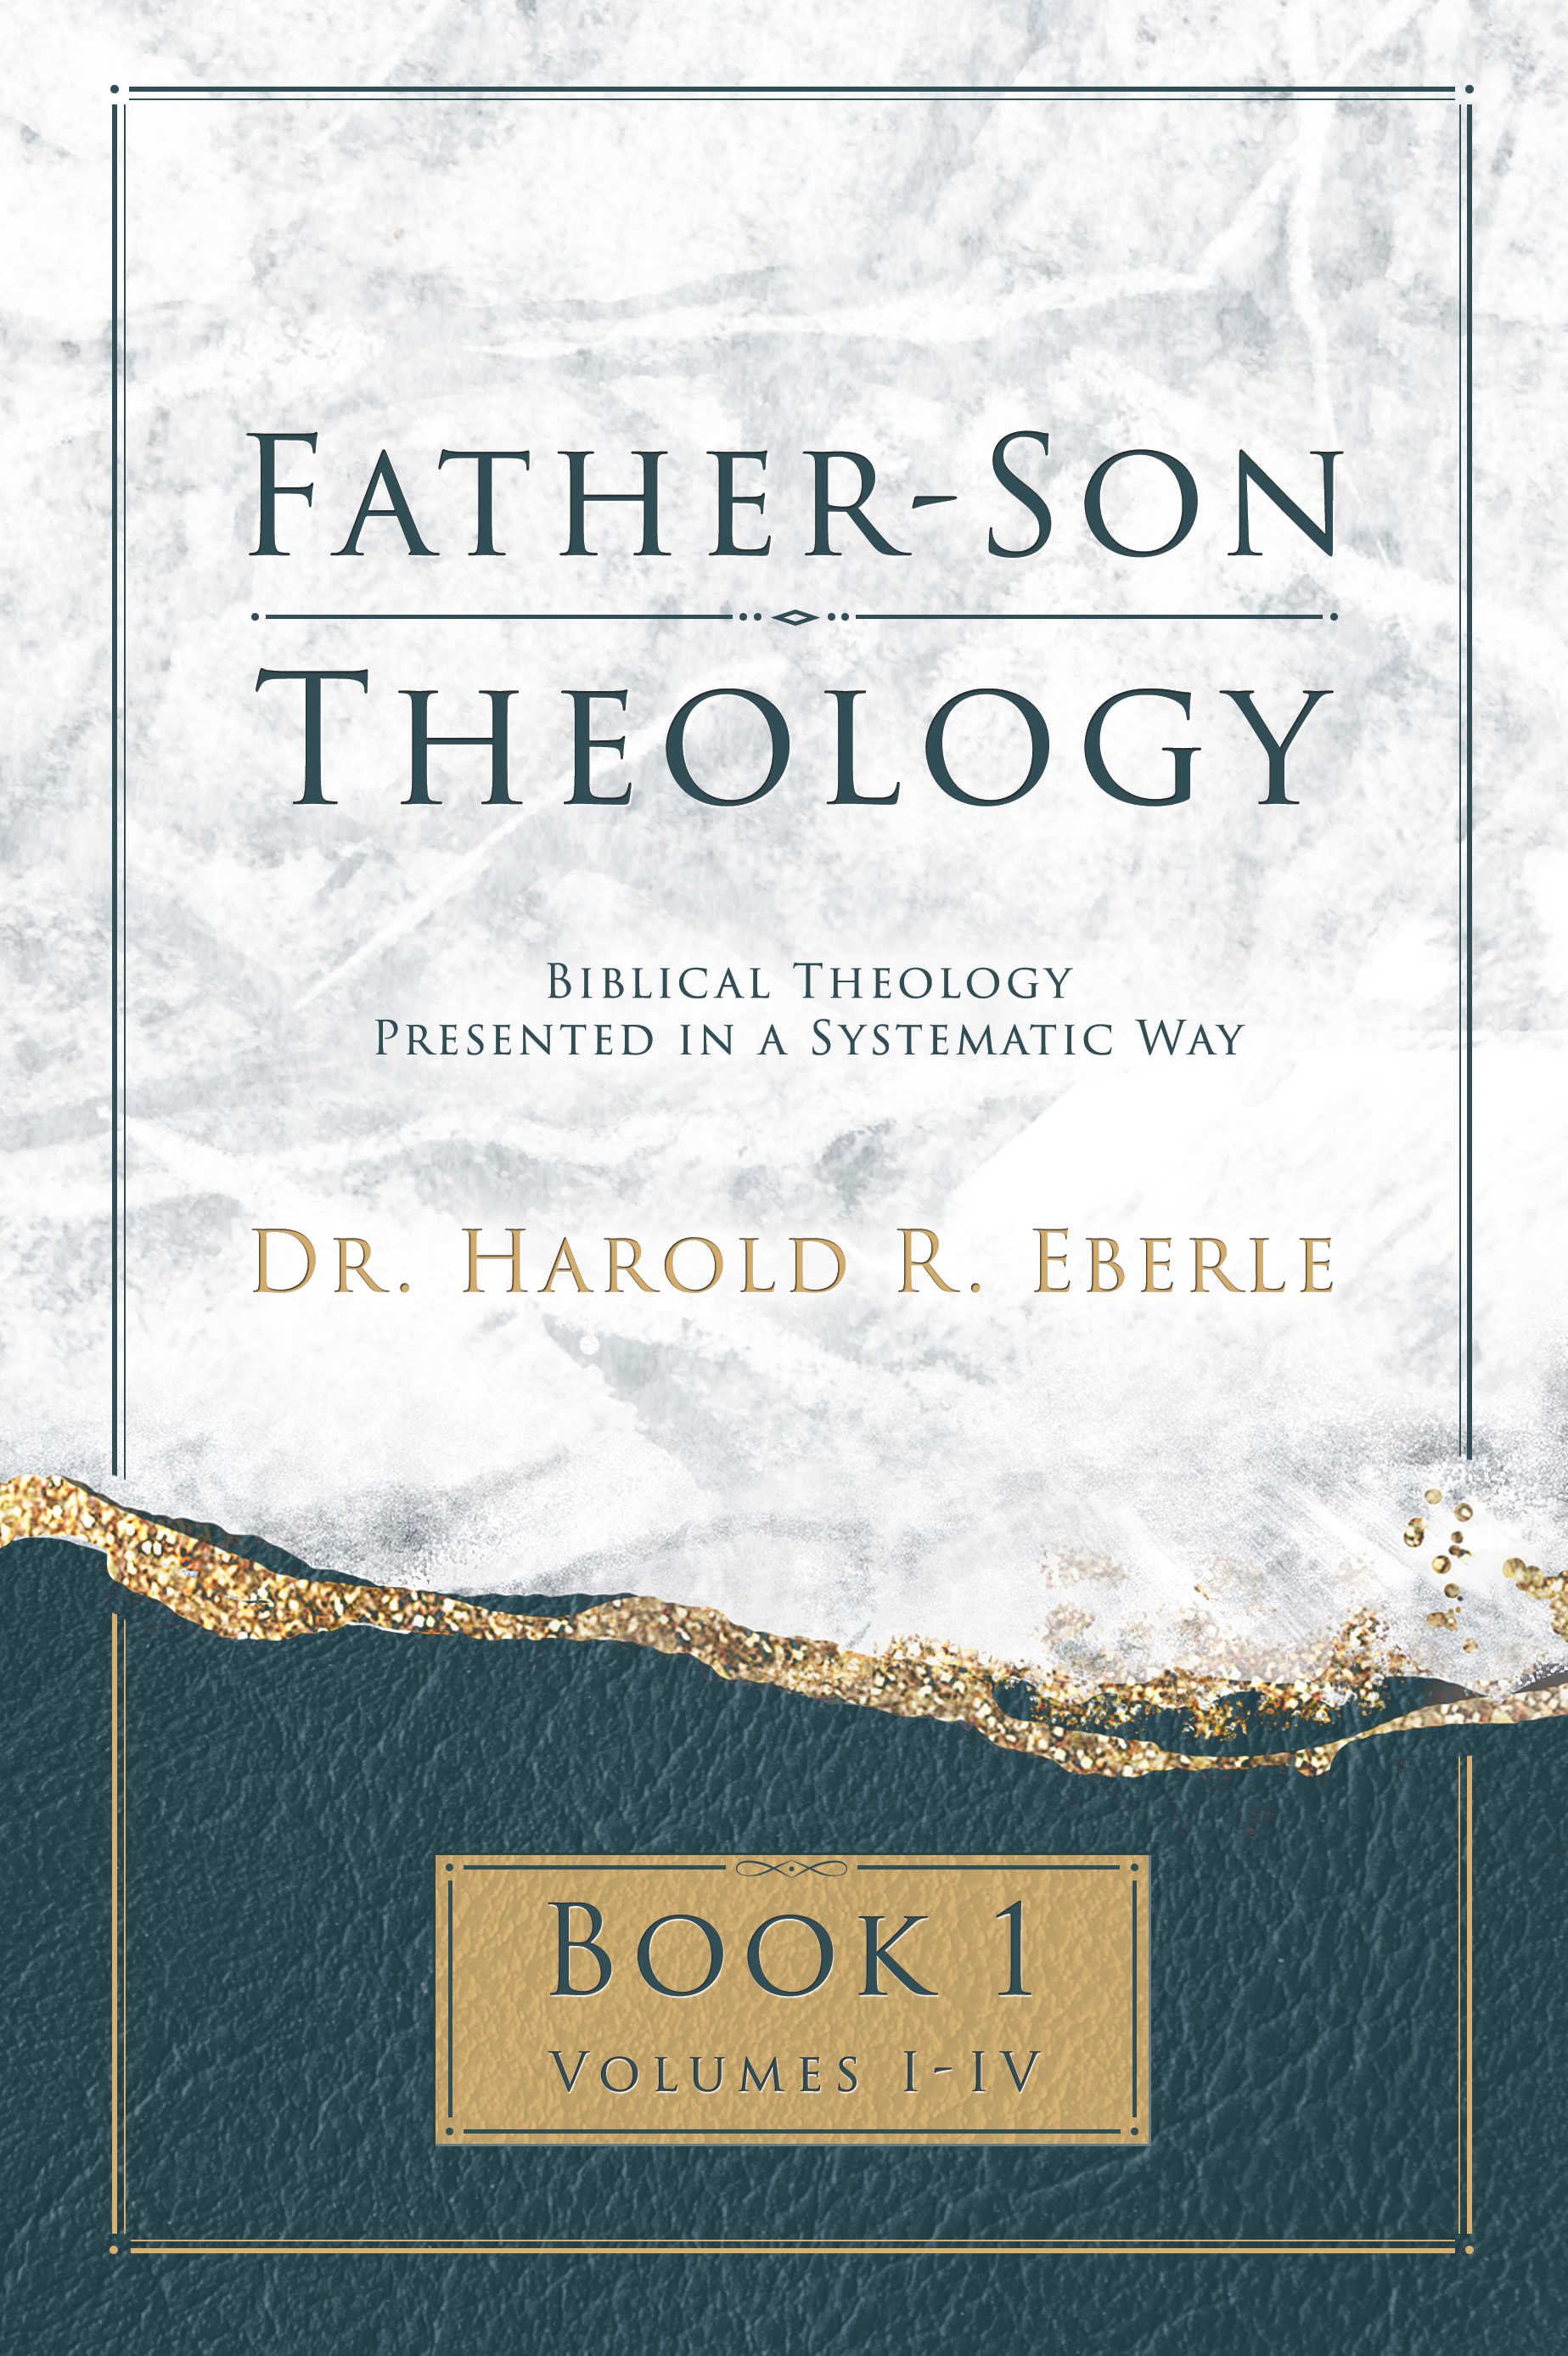 Father-Son Theology Book 1